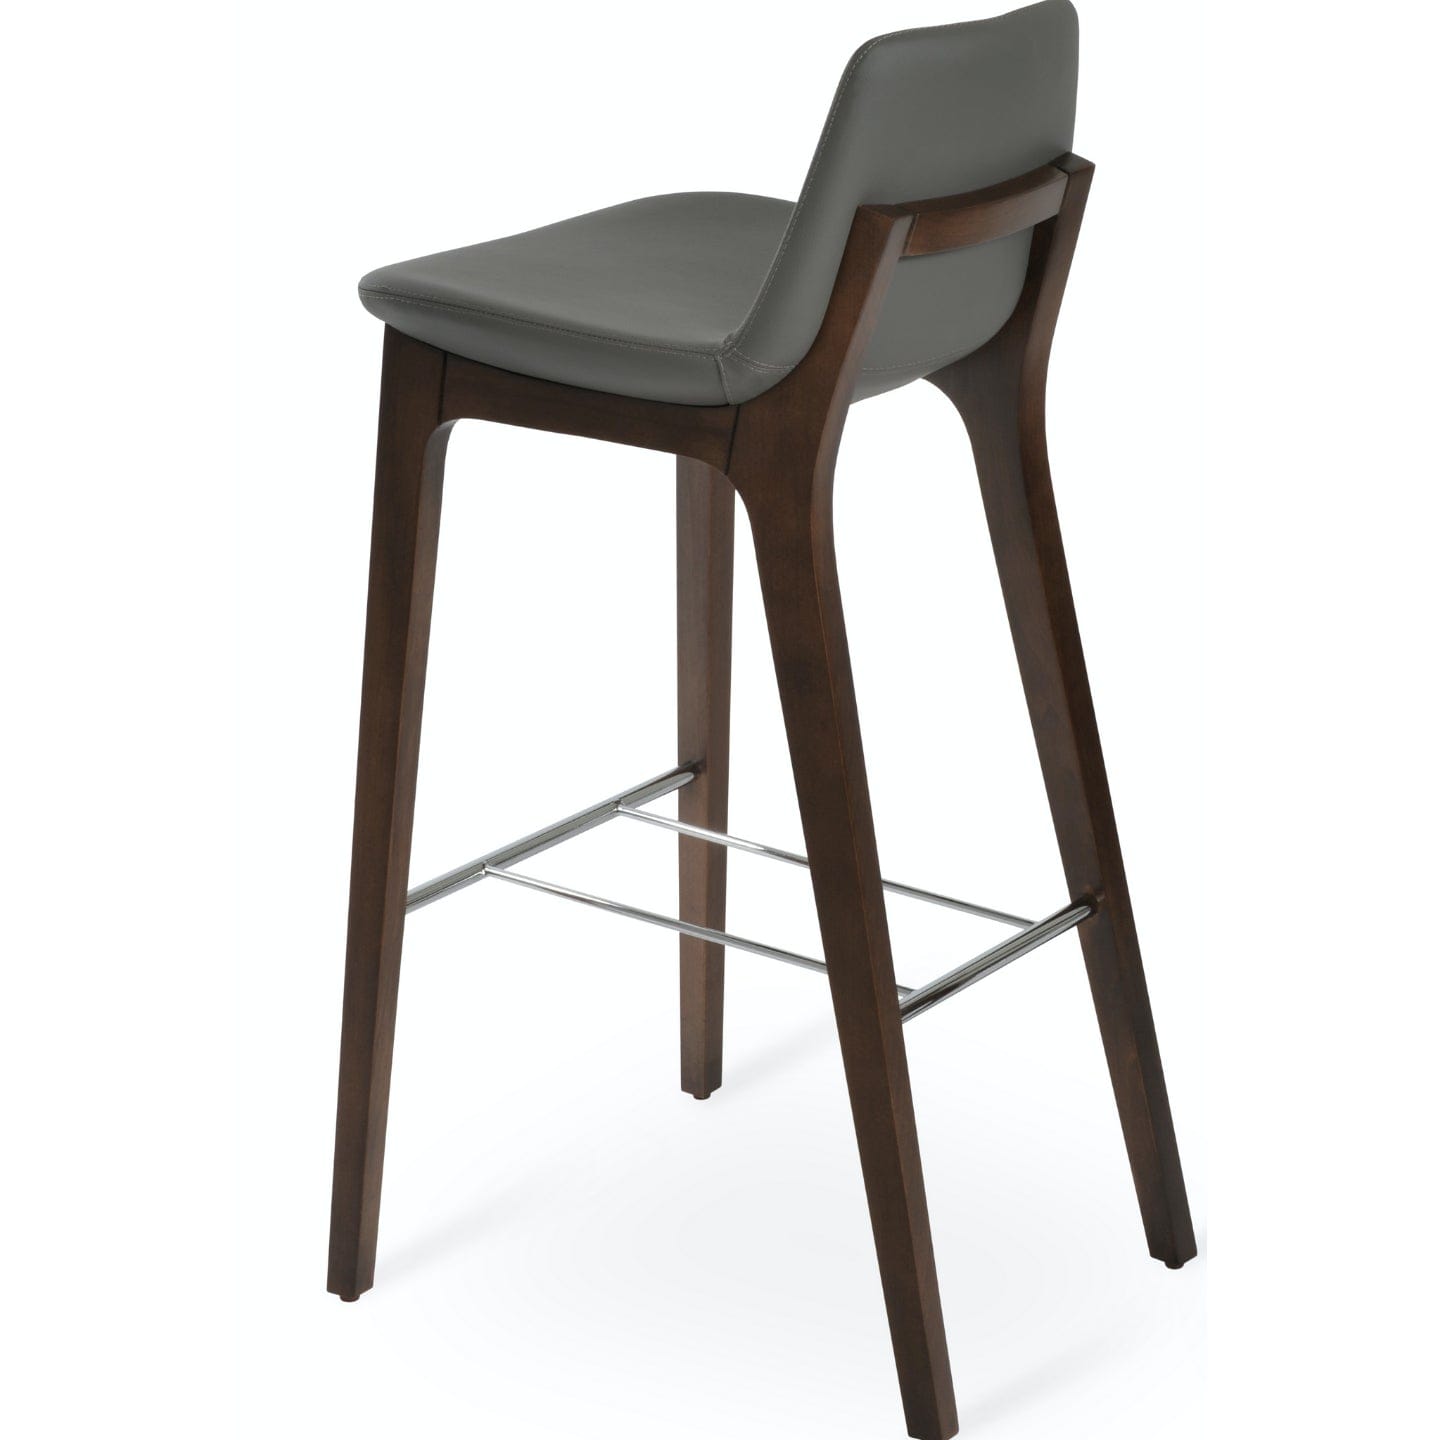 Soho Concept pera-wood-handle-back-wood-base-faux-leather-seat-kitchen-counter-stool-in-gray